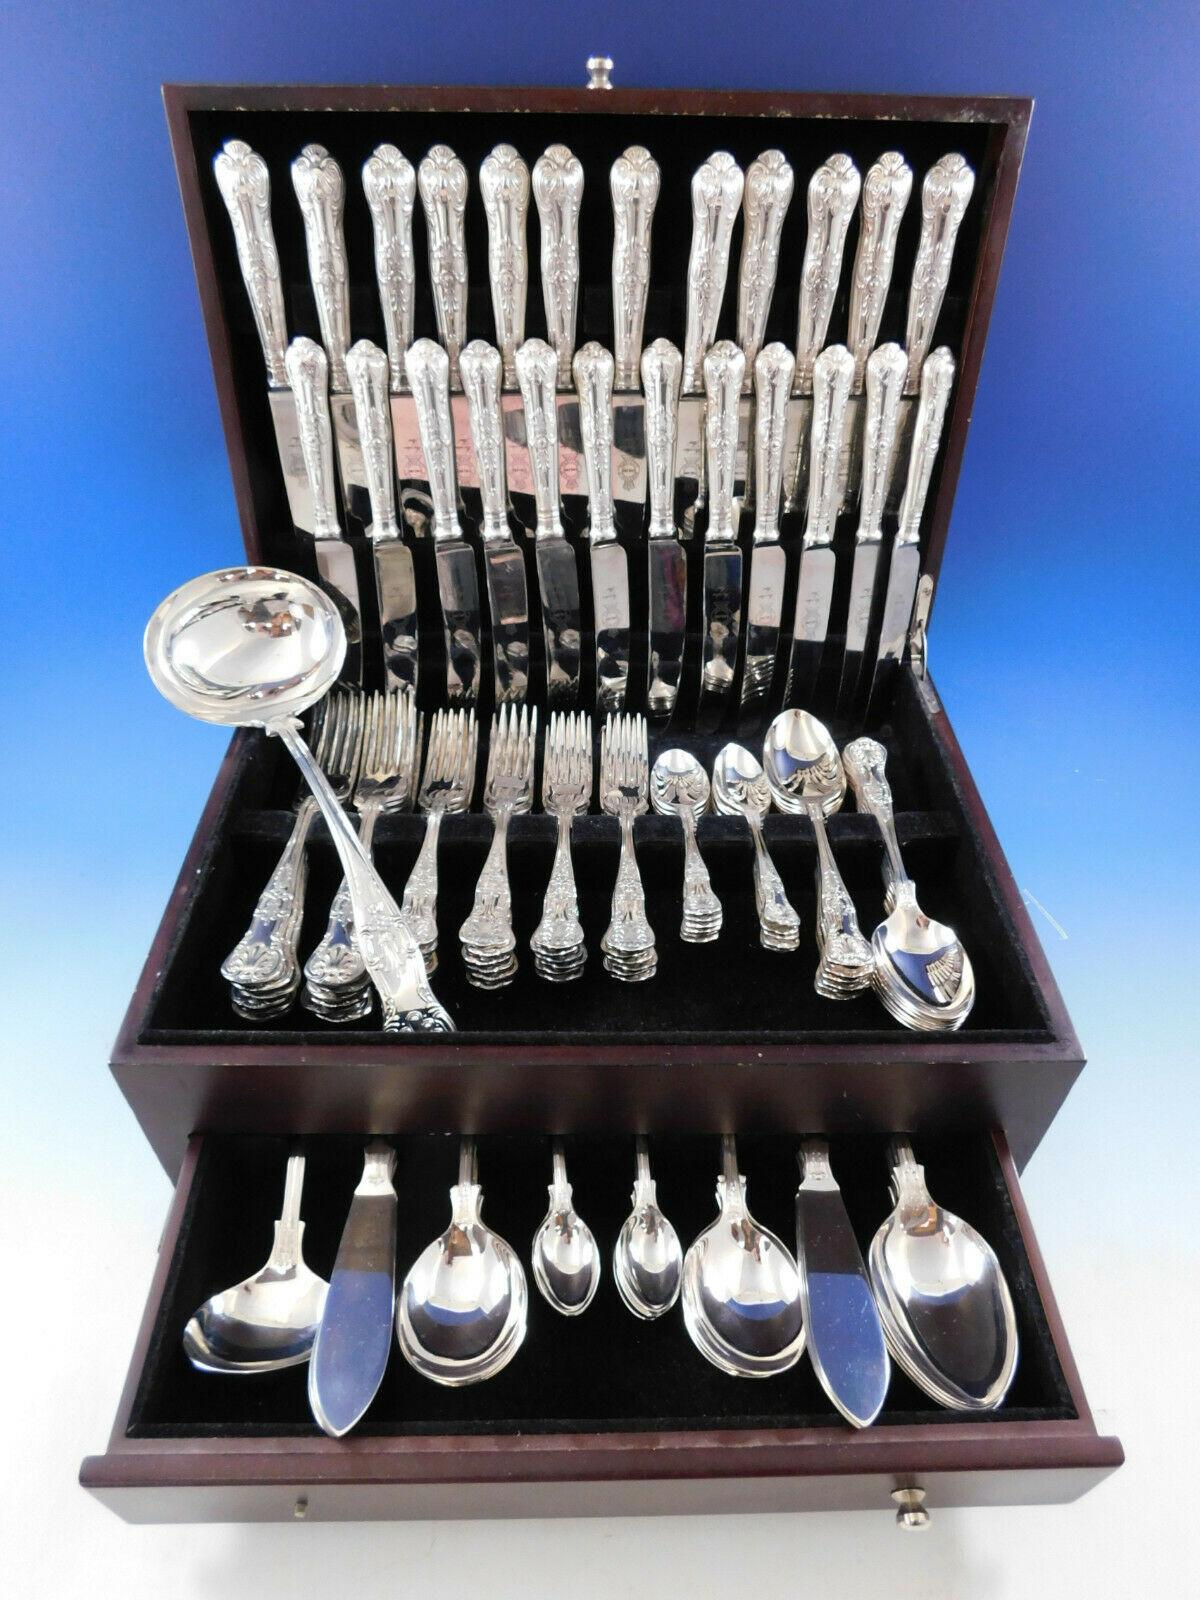 Large Queens English silver plated flatware set by Sheffield, 125 pieces total. This set includes:

12 large dinner size knives, 10